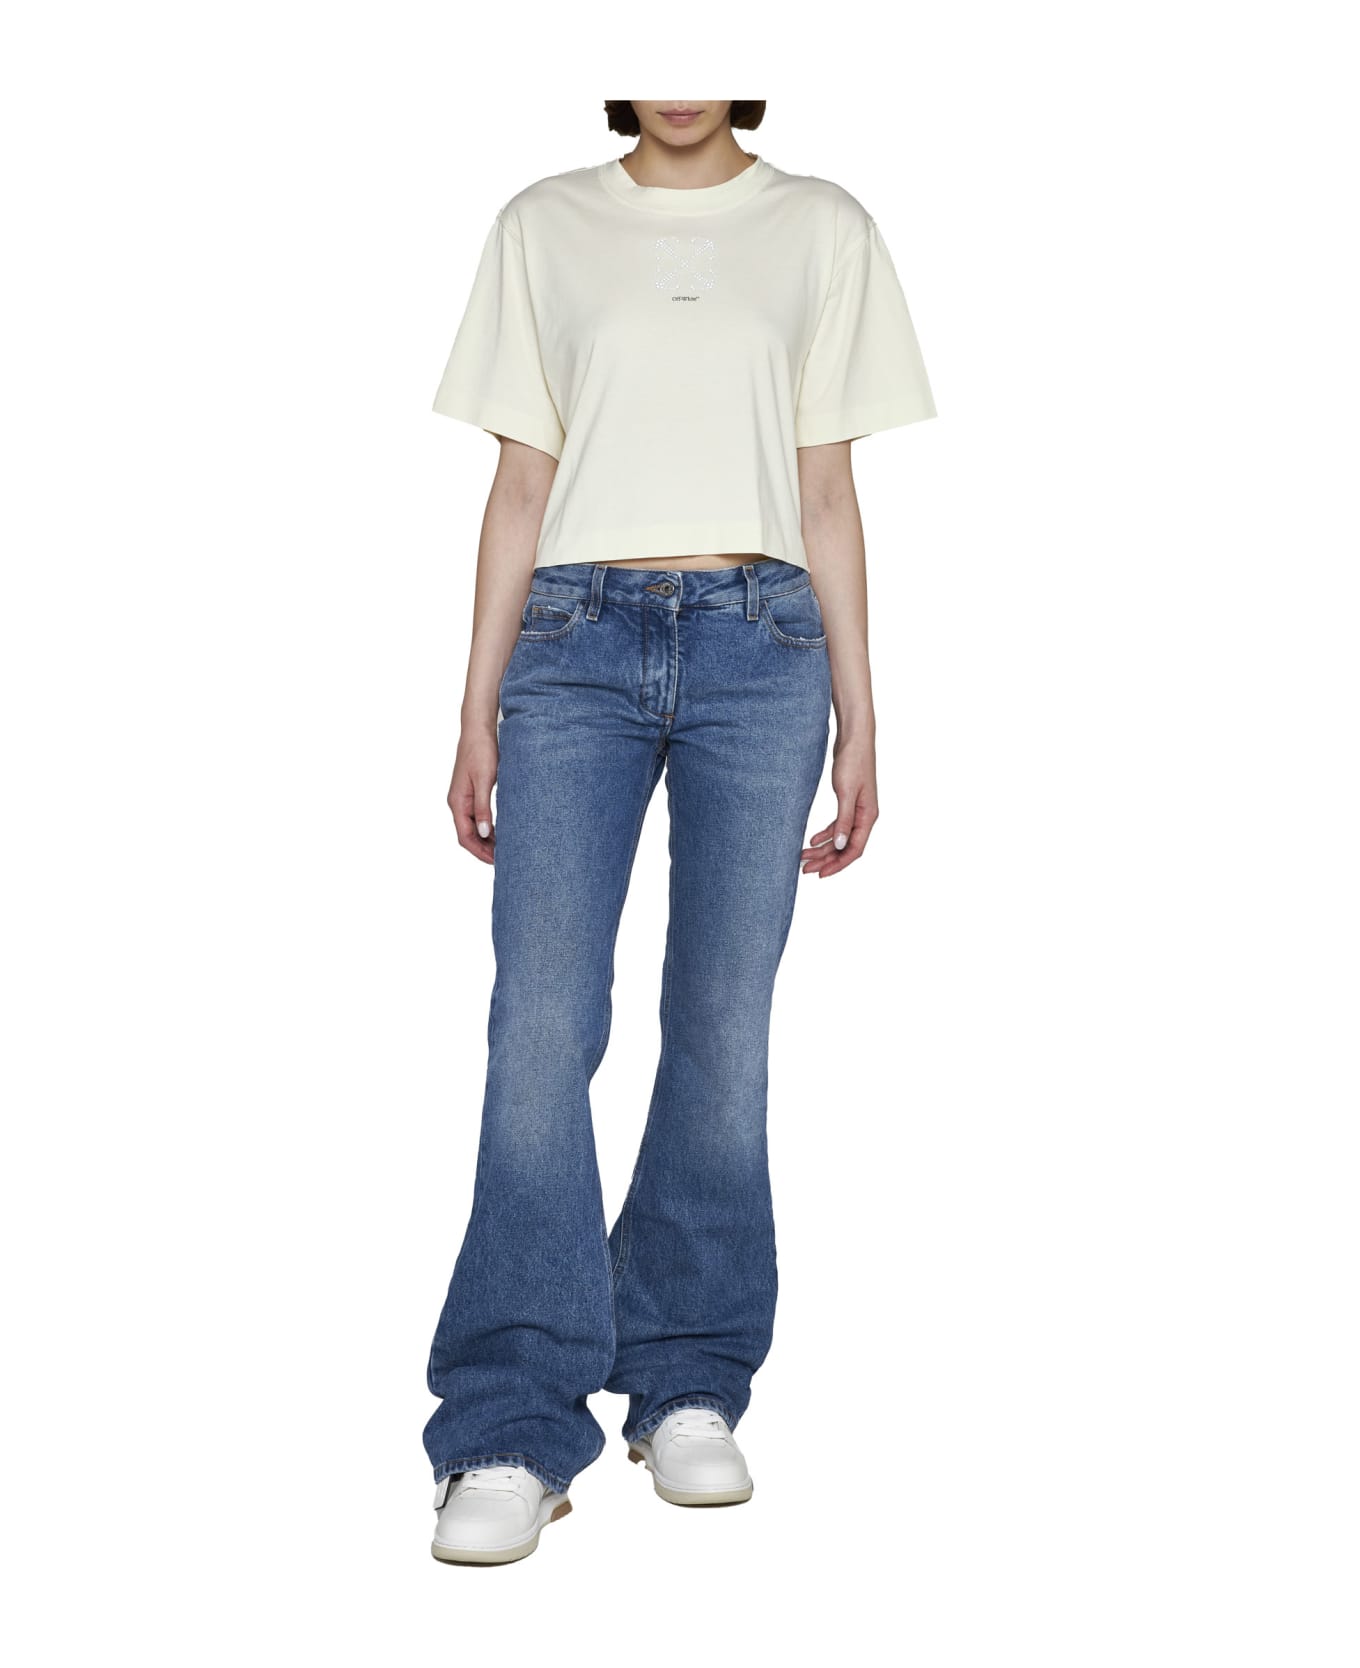 Off-White Pearl Embellished T-shirt - Yellow